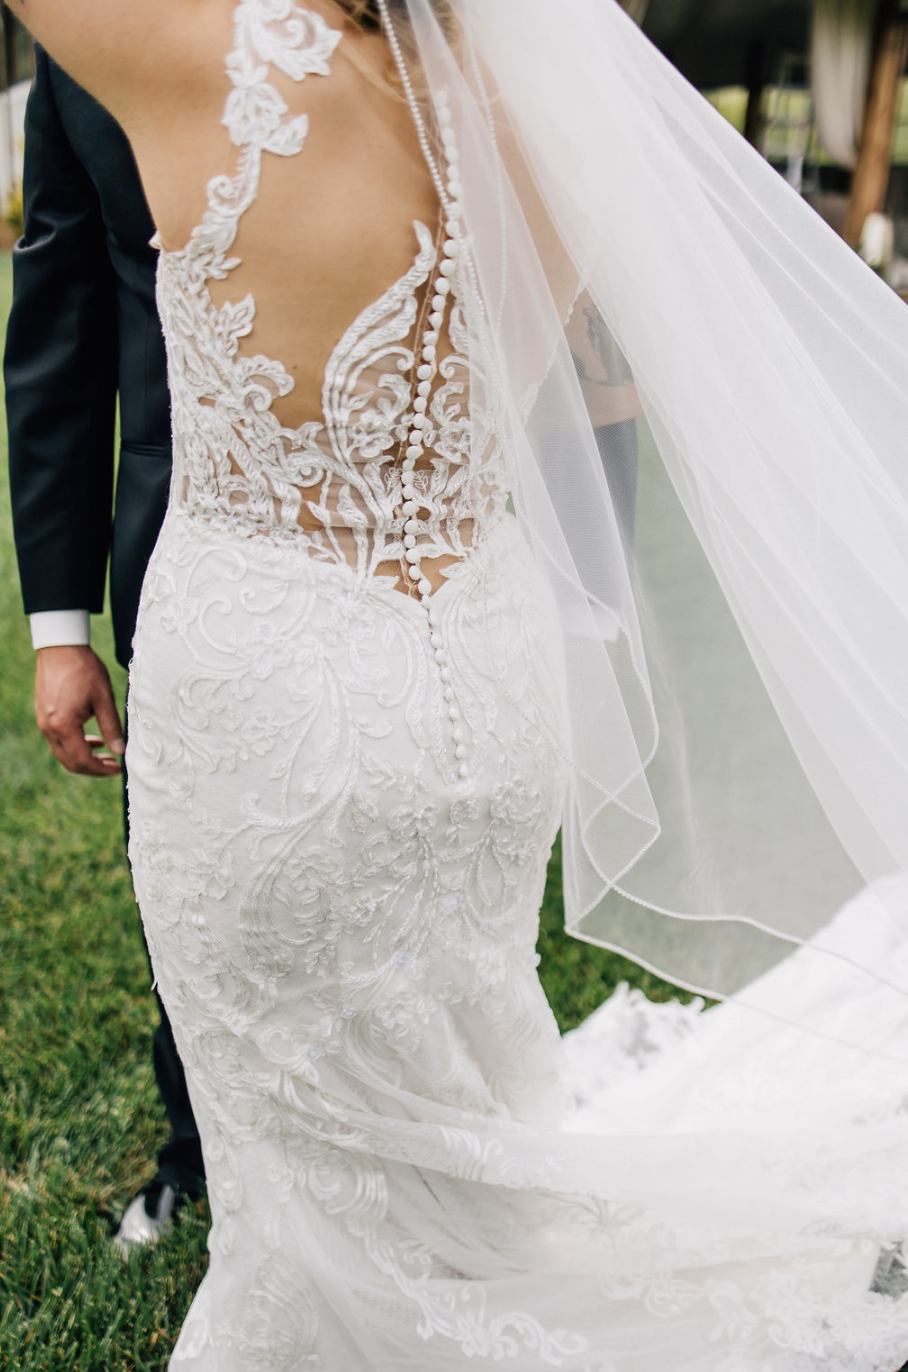 ivory-and-beau-bride-emily-in-hamilton-by-sottero-and-midgley-a-classic-fitted-lace-wedding-gown-with-illusion-back-purchased-from-savannah-bridal-shop-ivory-and-beau-5.png